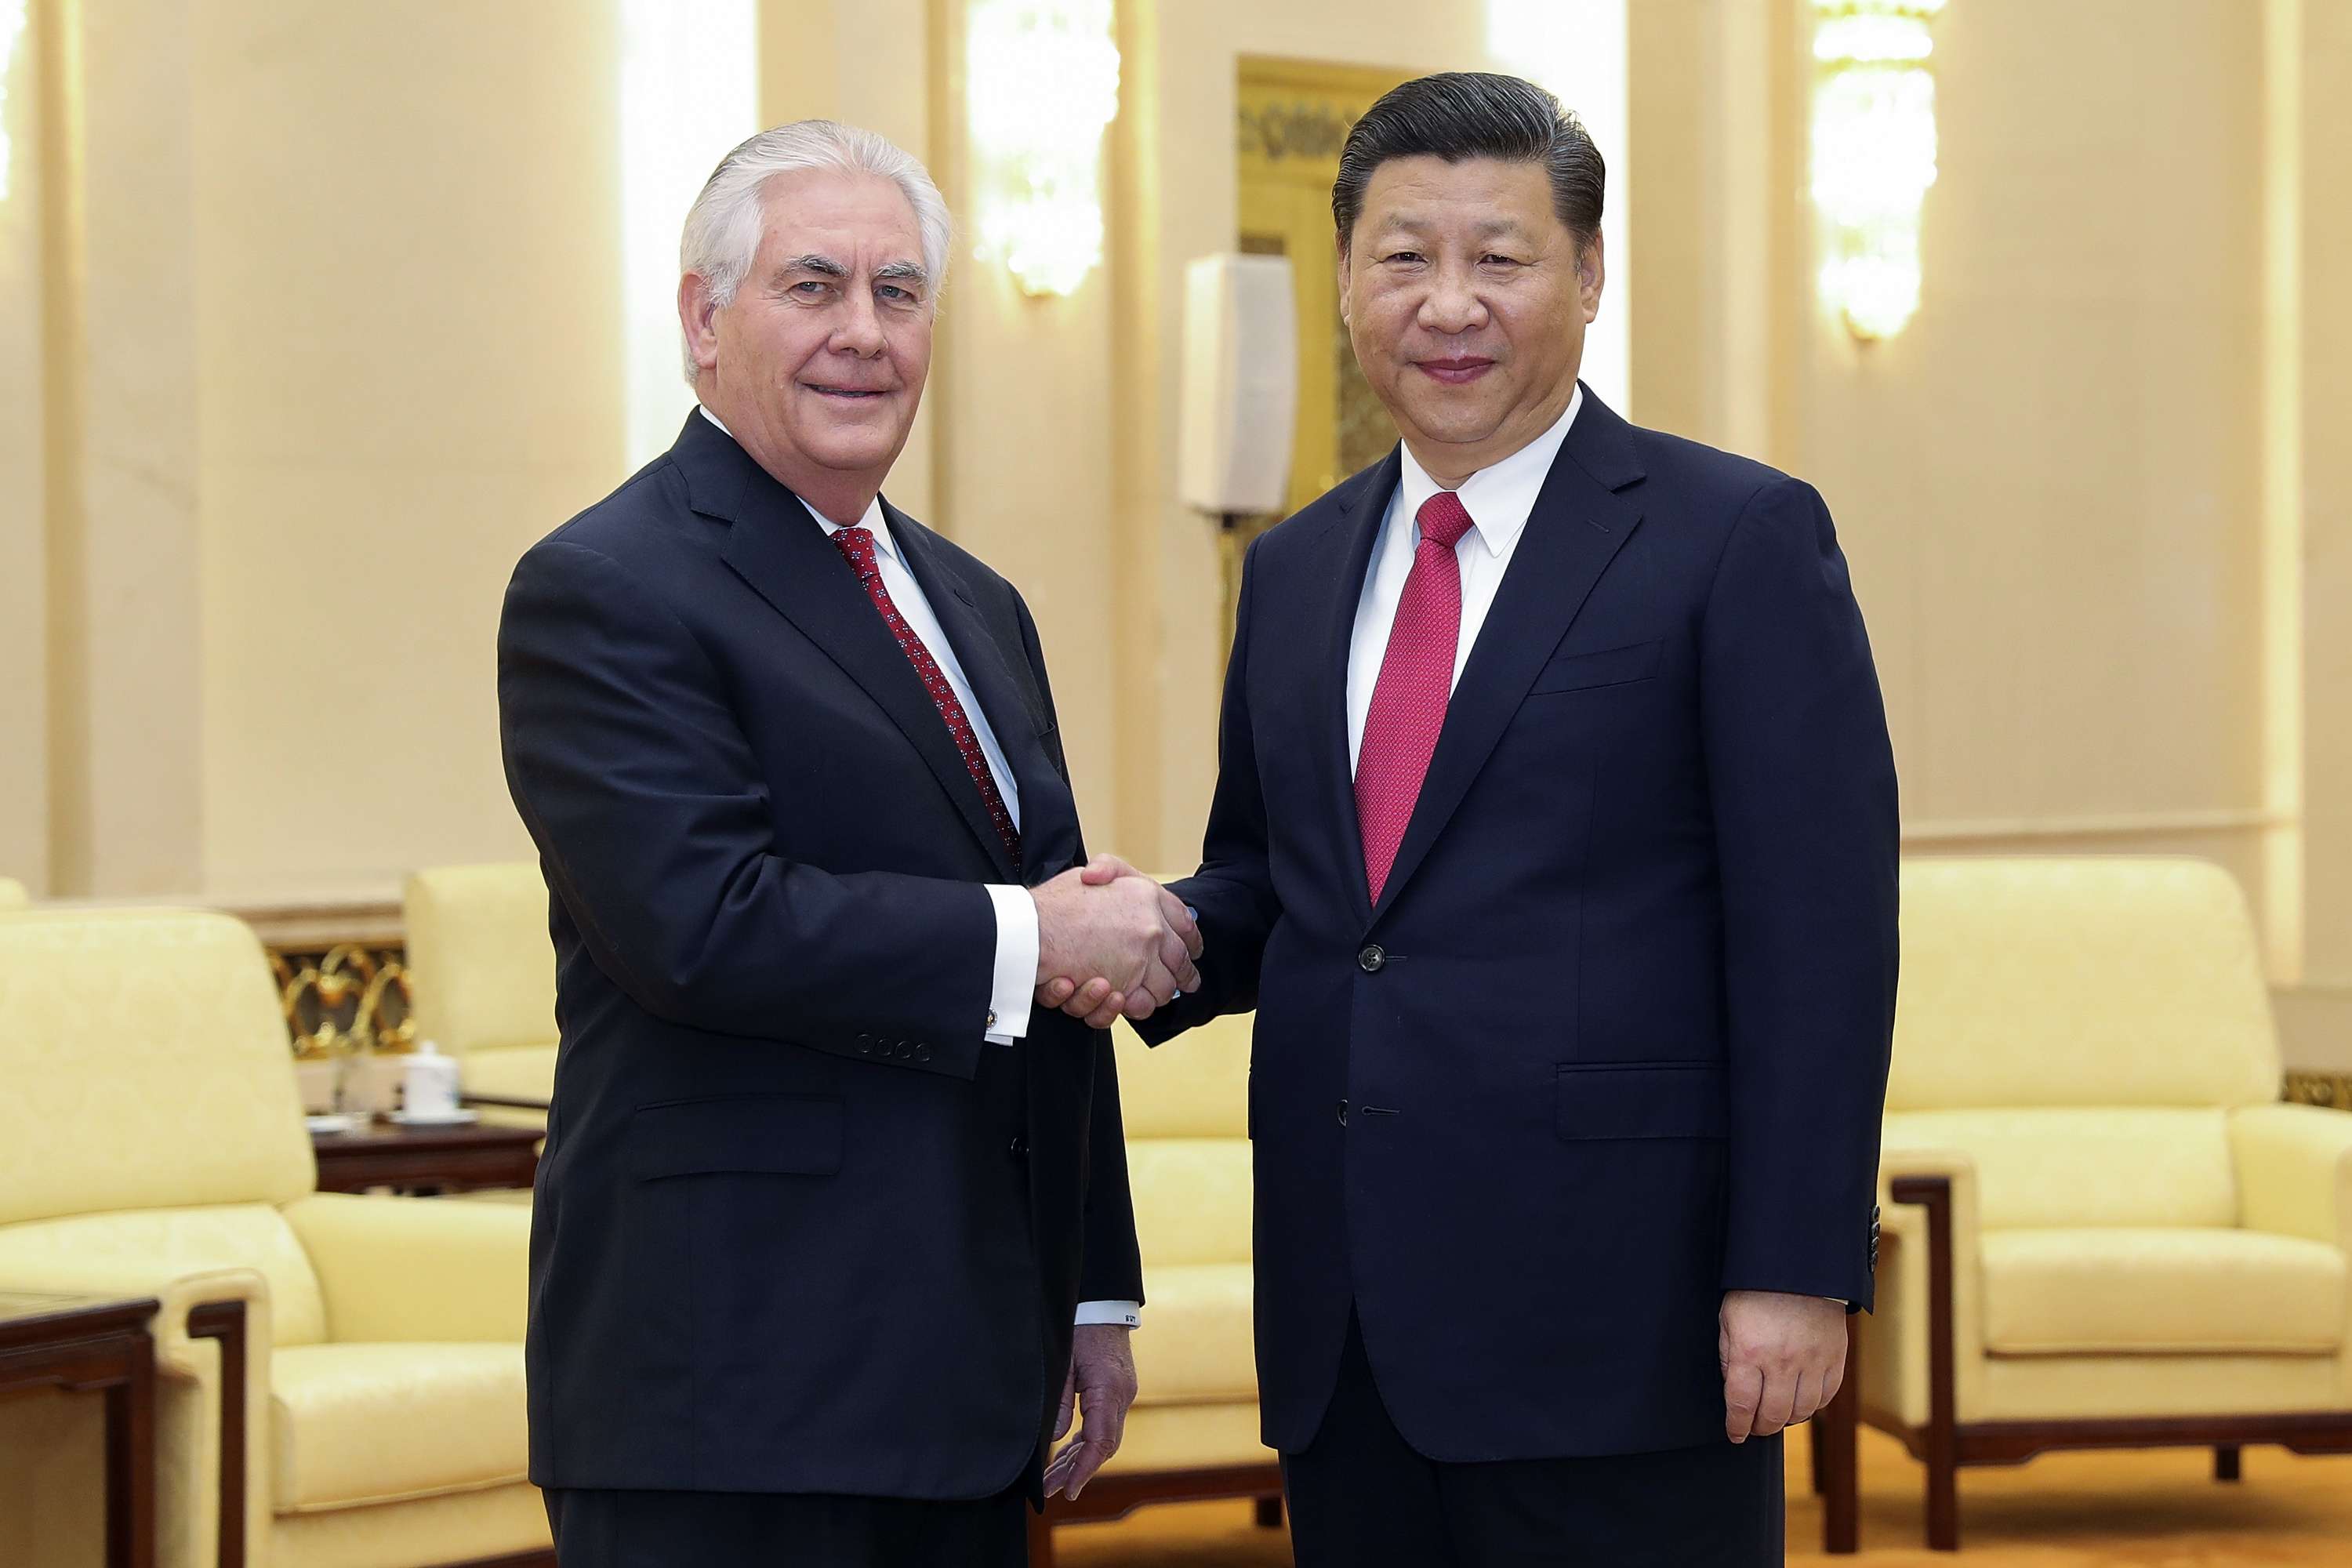 US State of Secretary Rex Tillerson (L) shakes hands with China's President Xi Jinping at the Great Hall of the People in Beijing, China Sunday, March 19, 2017. Photo: AP